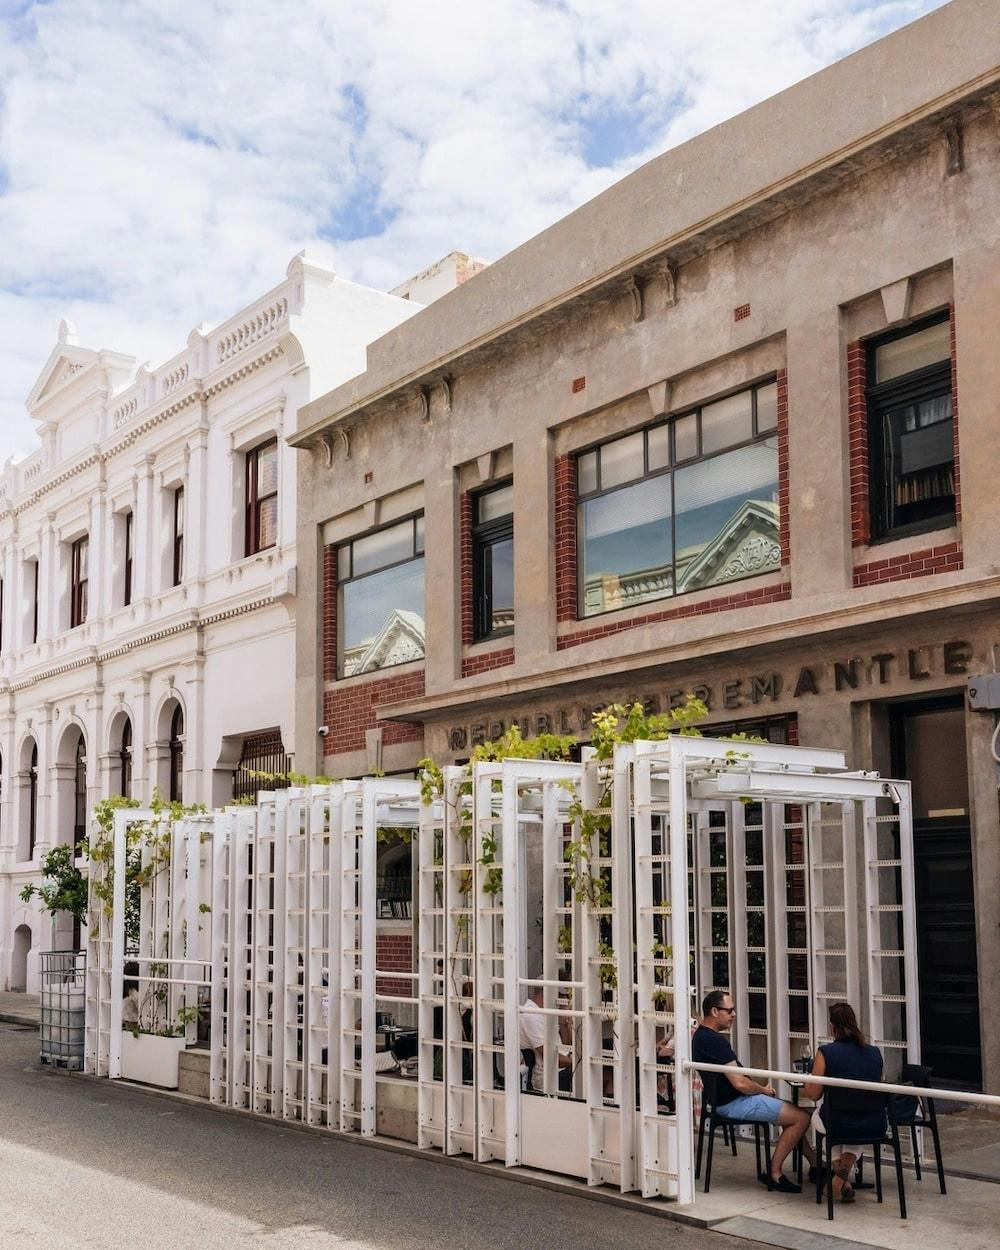 What To Do in Freo, Republic of Fremante